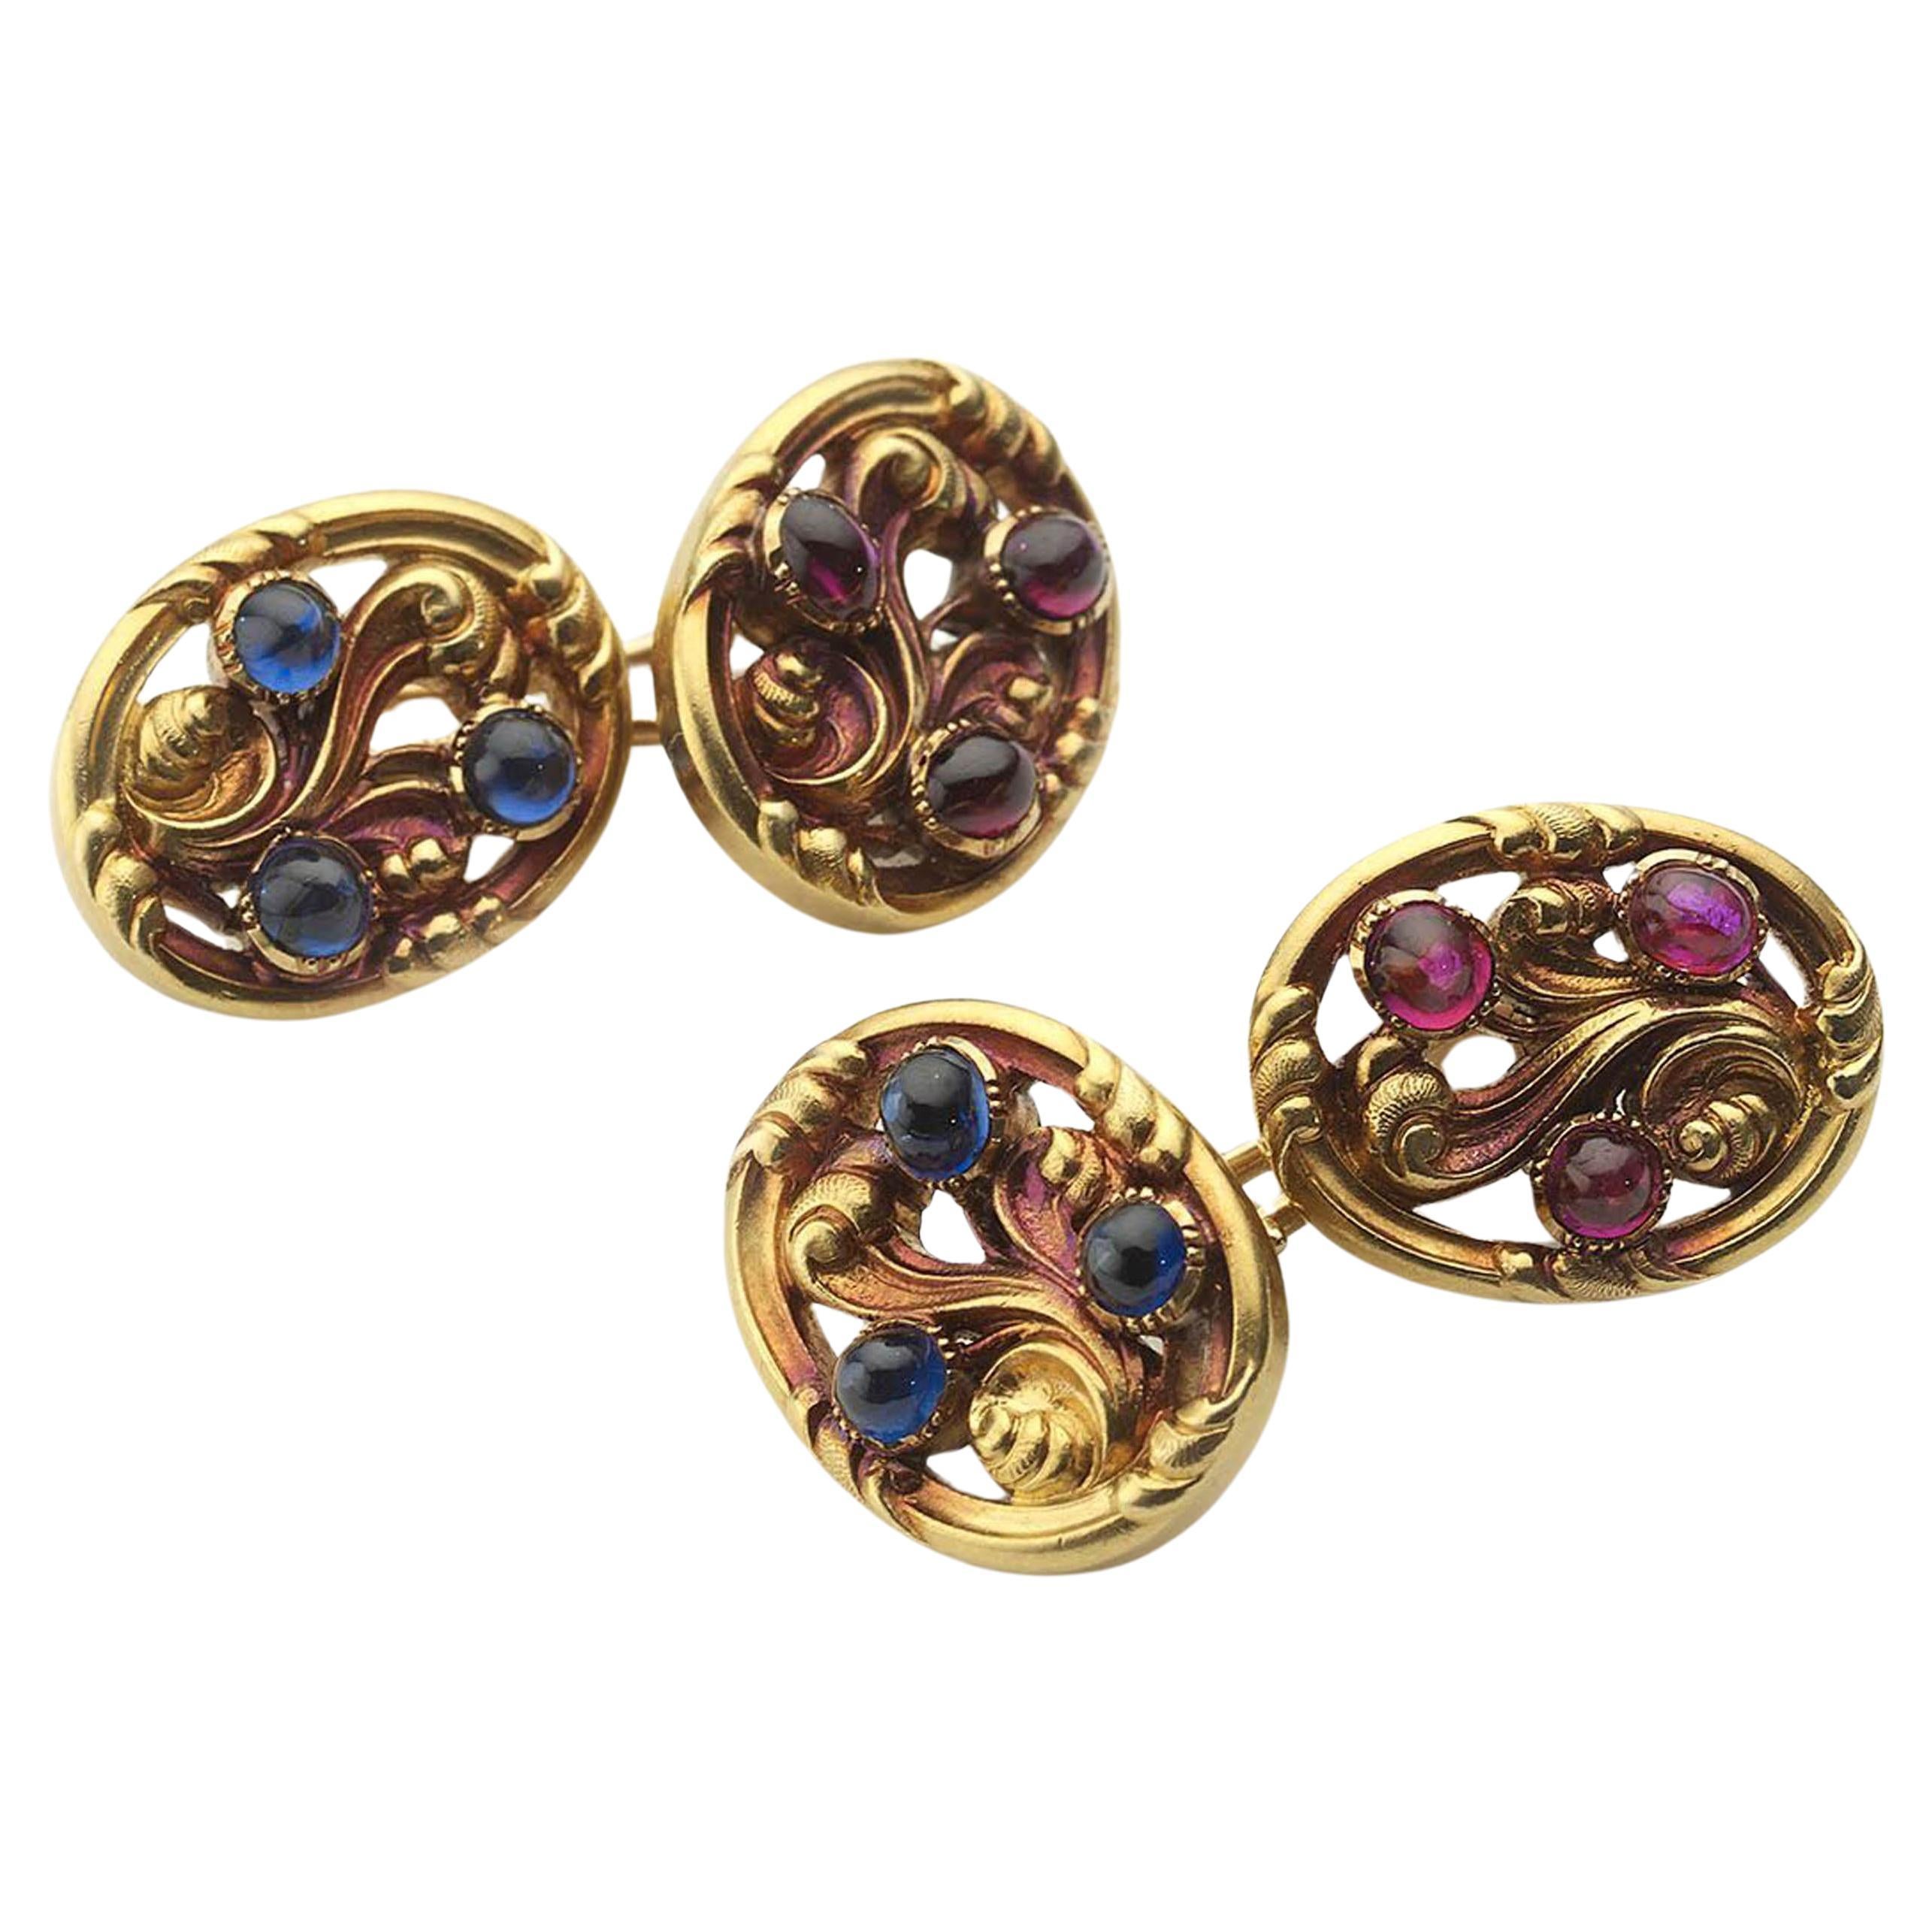 Tiffany & Co. Art Nouveau Sapphire Ruby and Gold Cufflinks, Circa 1890 For Sale